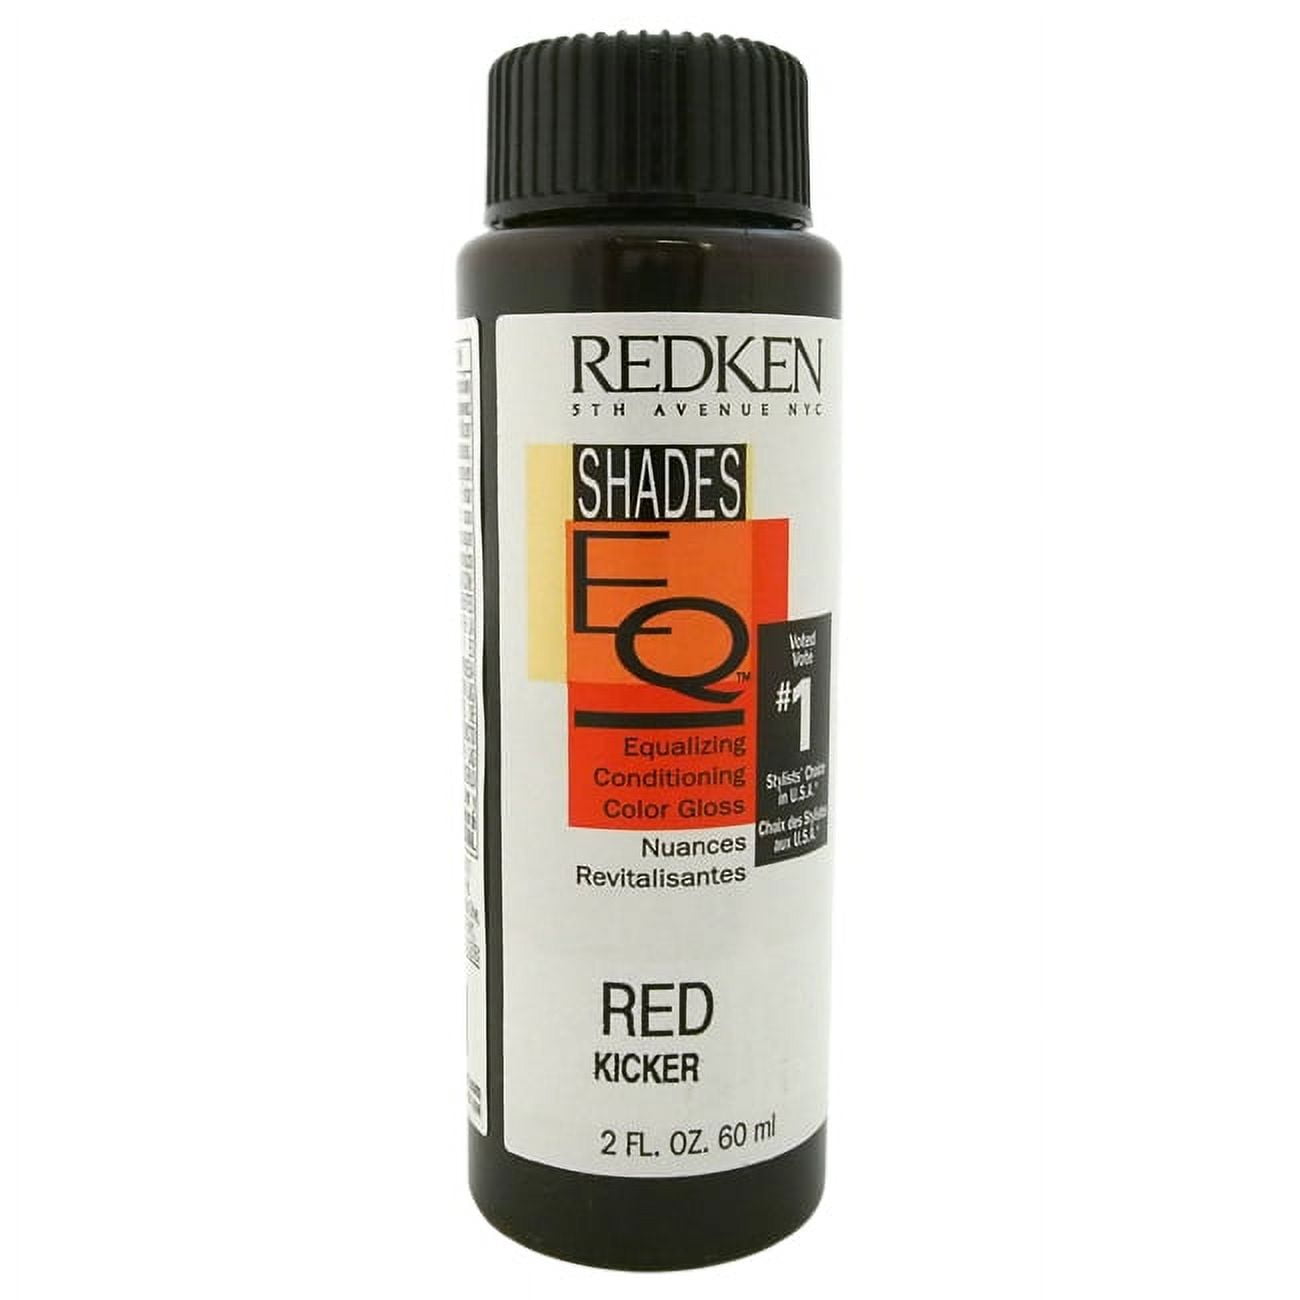 Shades Eq Color Gloss Red Kicker By Redken For Women 2 Oz Hair Color 